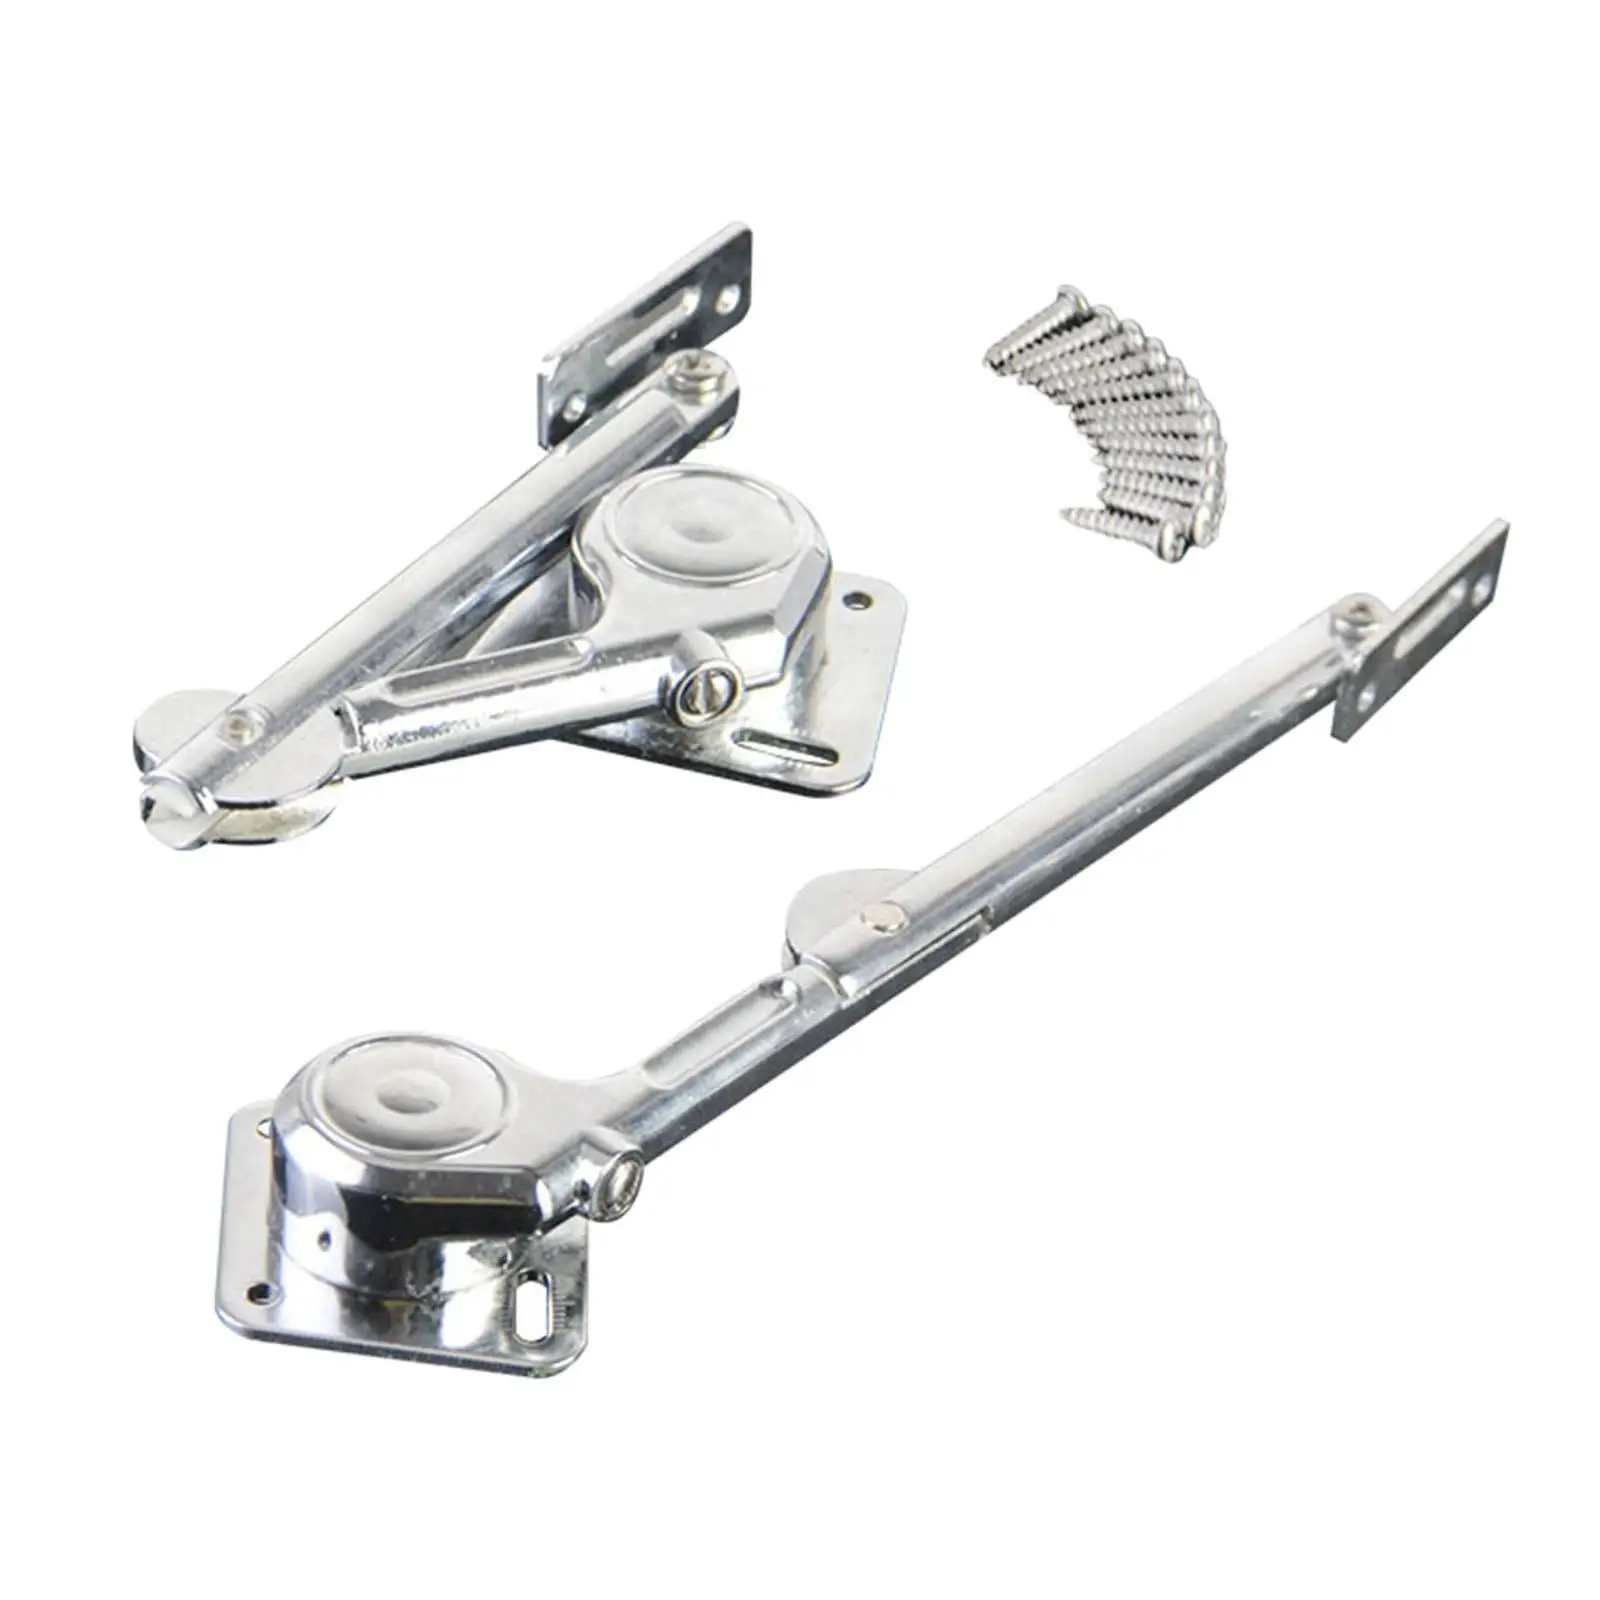 2 Pieces Heavy Duty Hydraulic Hinges Support Rod Prop Furniture Tools Shock Adjustable Lift up for Kitchen Door